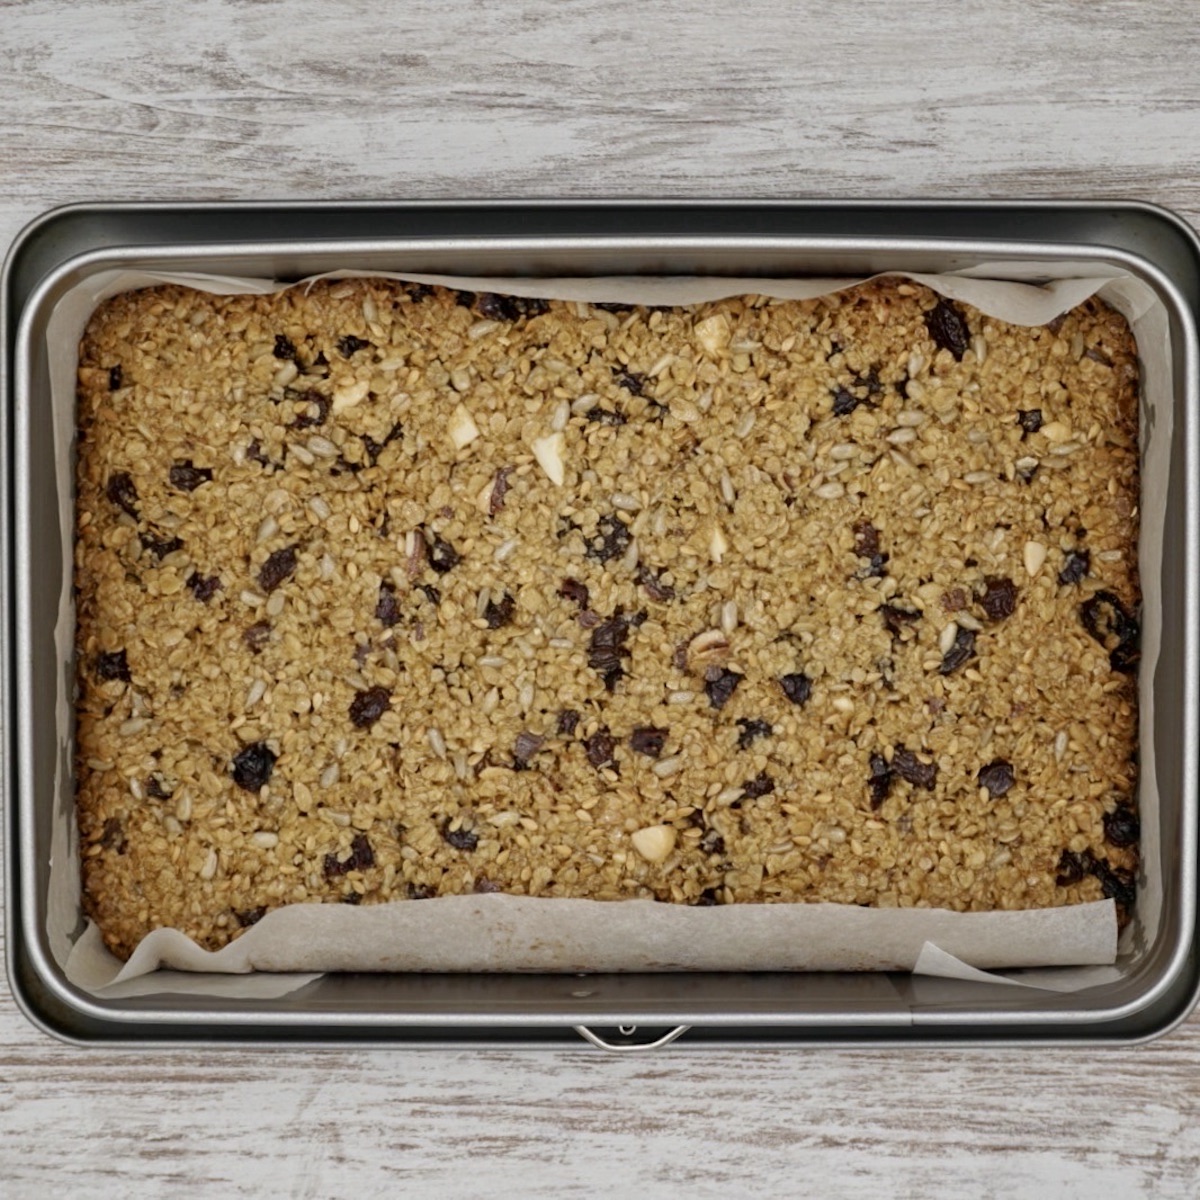 Fruit and nut flapjack in a baking tin.